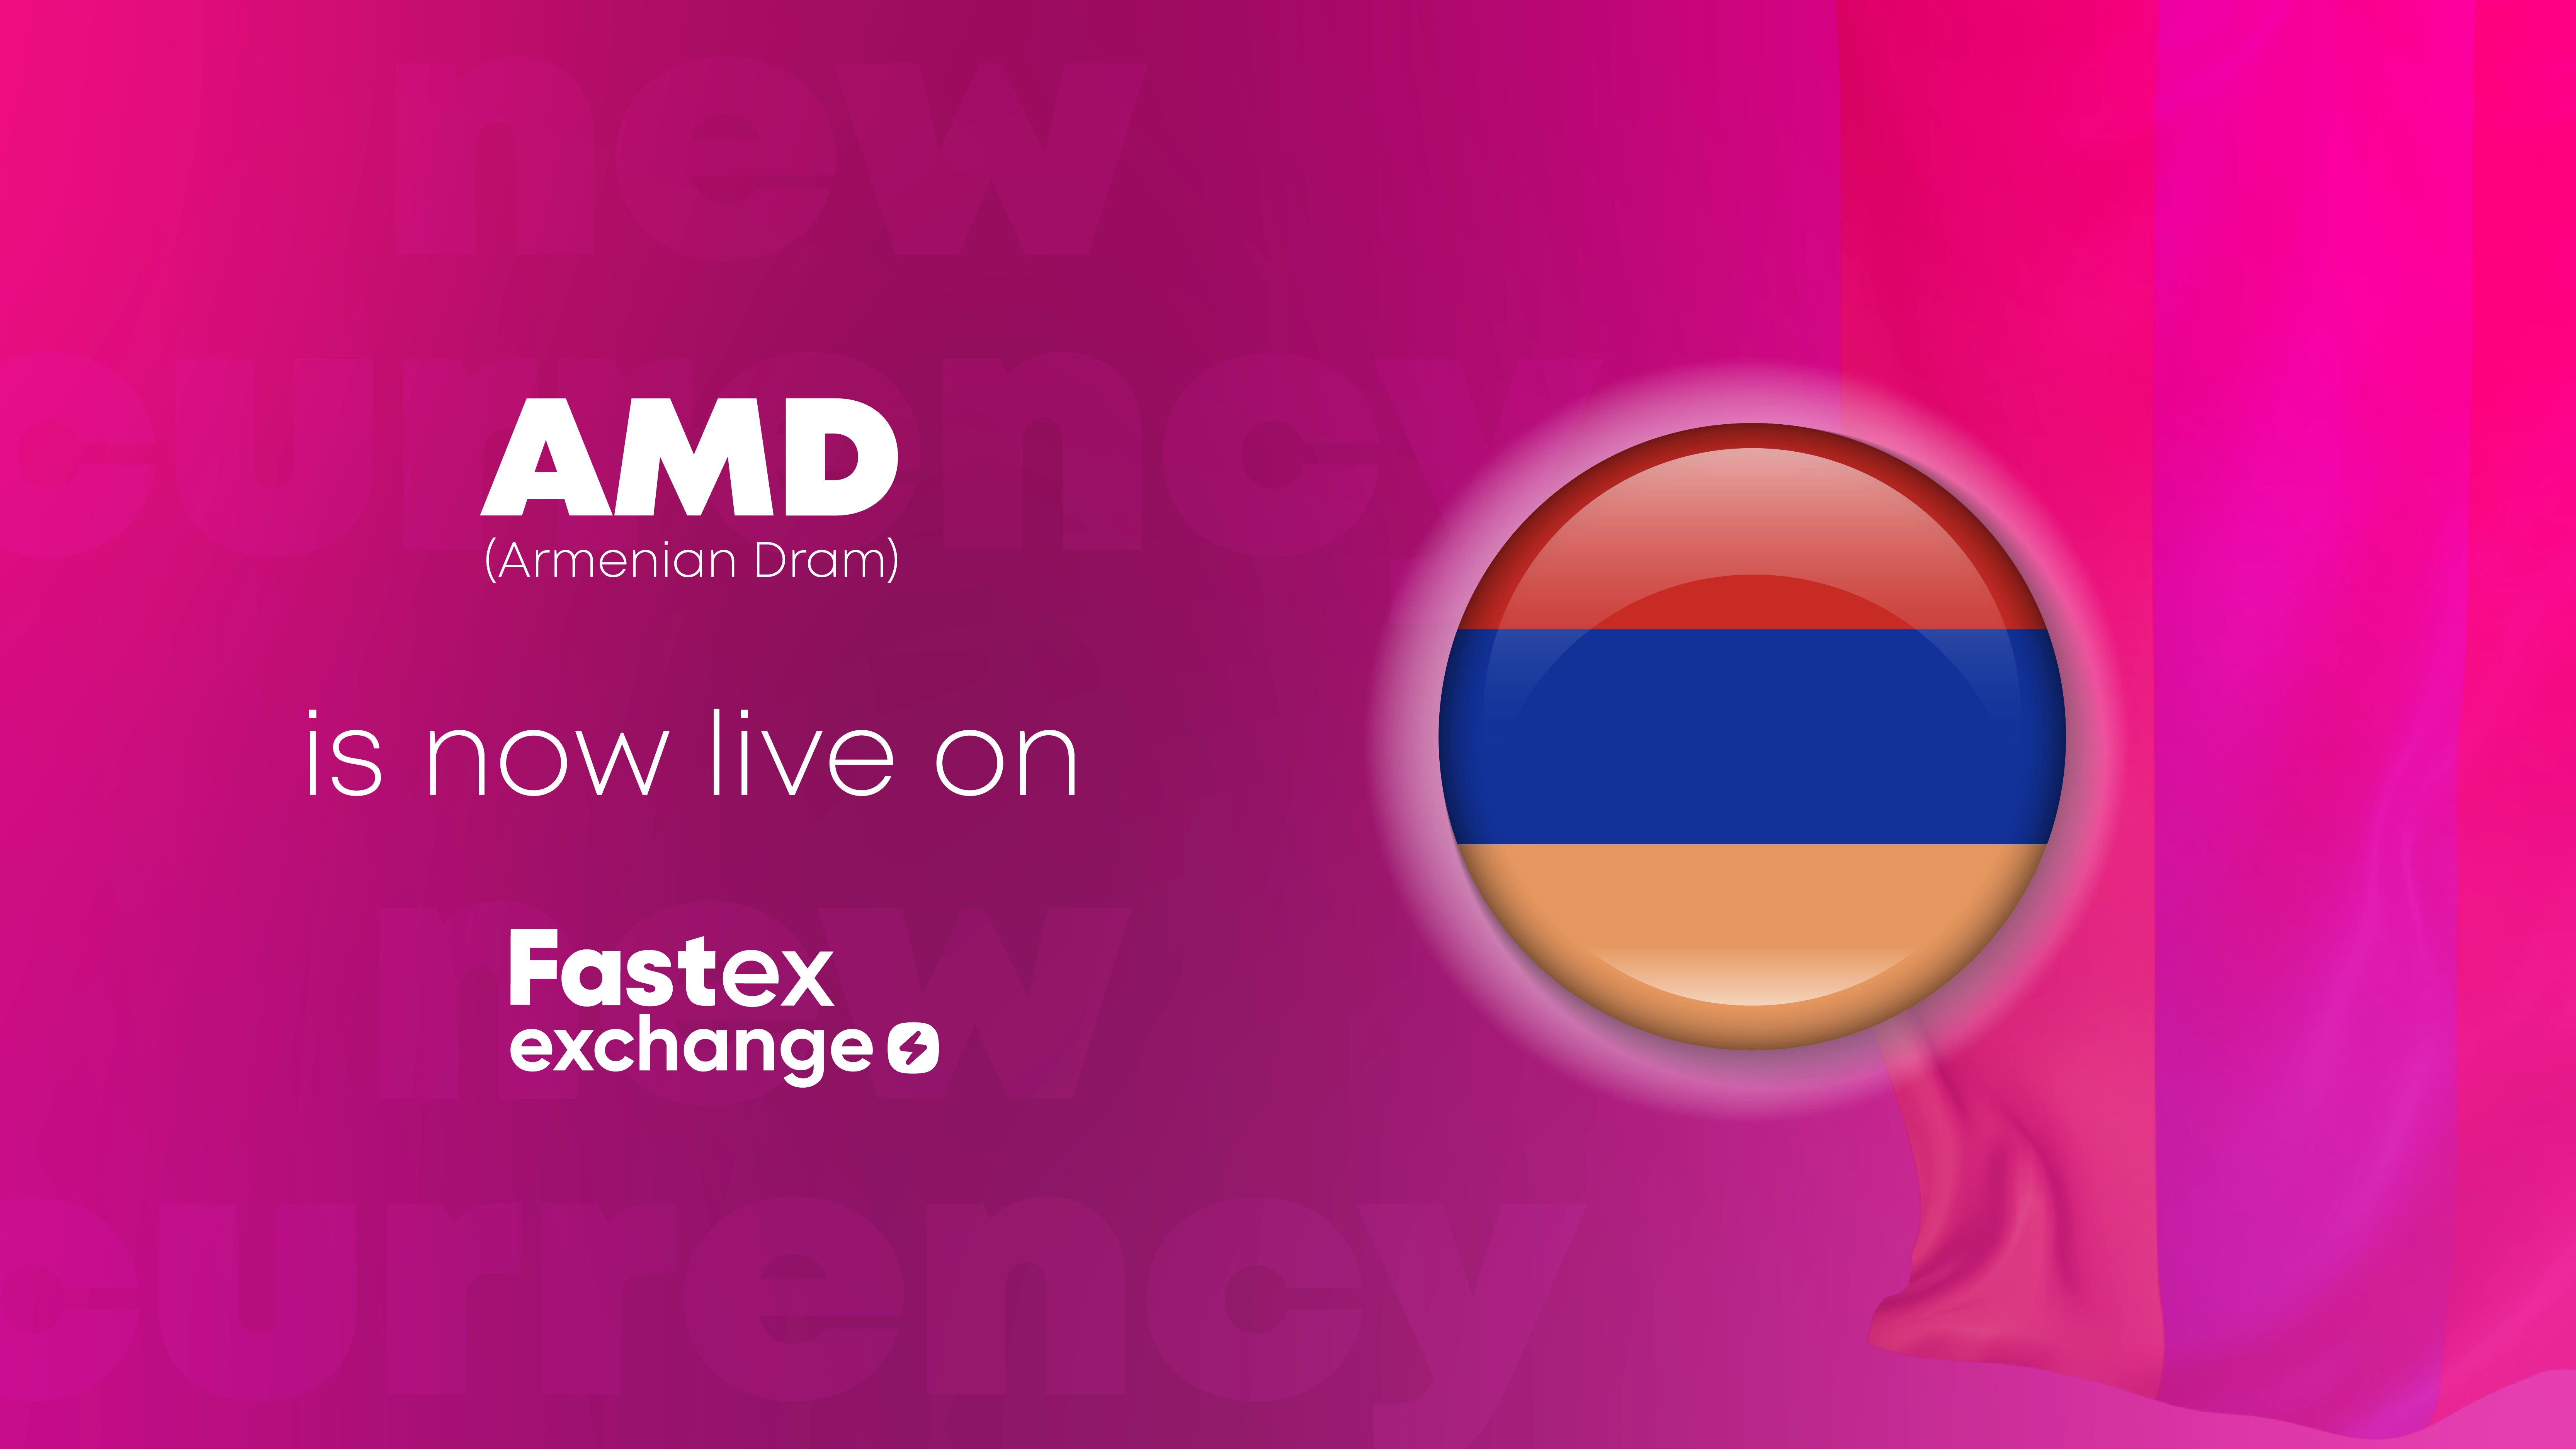 Fastex Exchange integrated the Armenian National Currency AMD